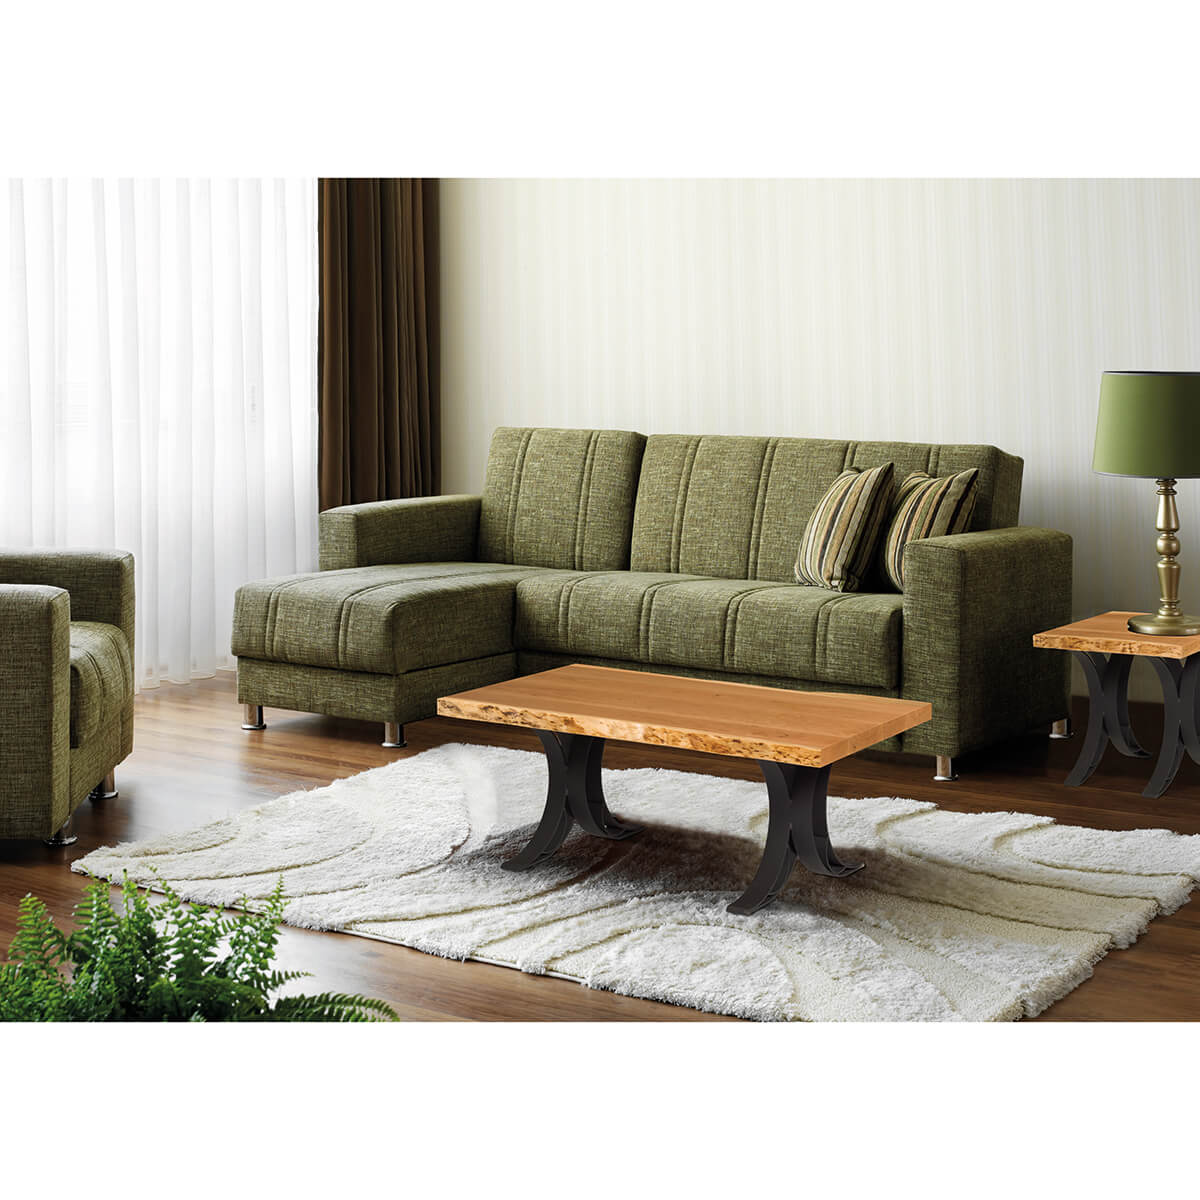 Read more about the article Live Edge Living Room Collection